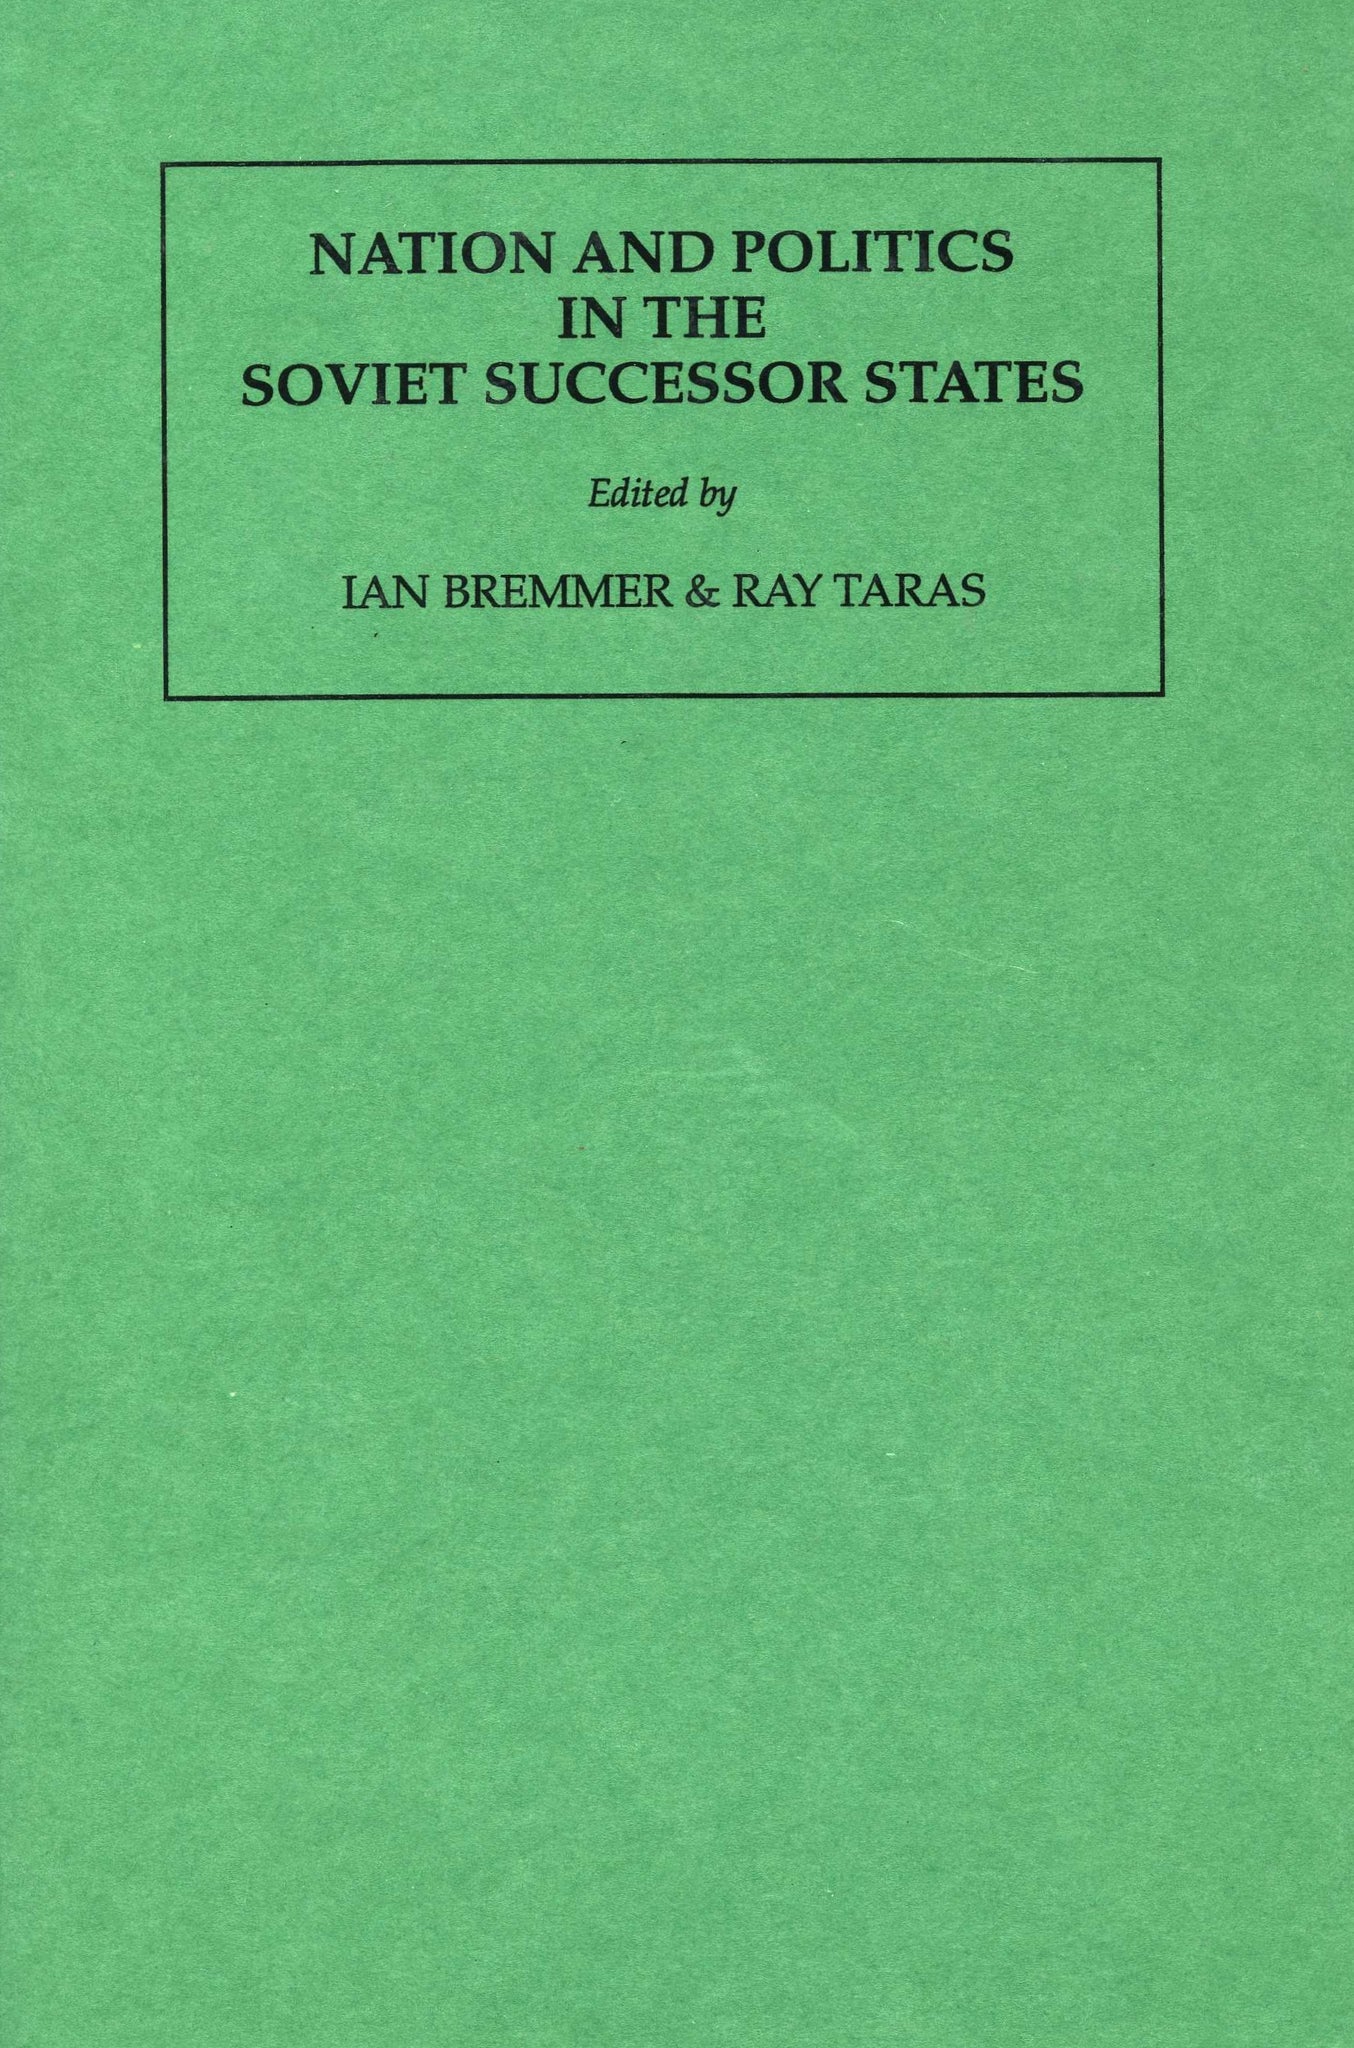 NATION AND POLITICS IN THE SOVIET SUCCESSOR STATES